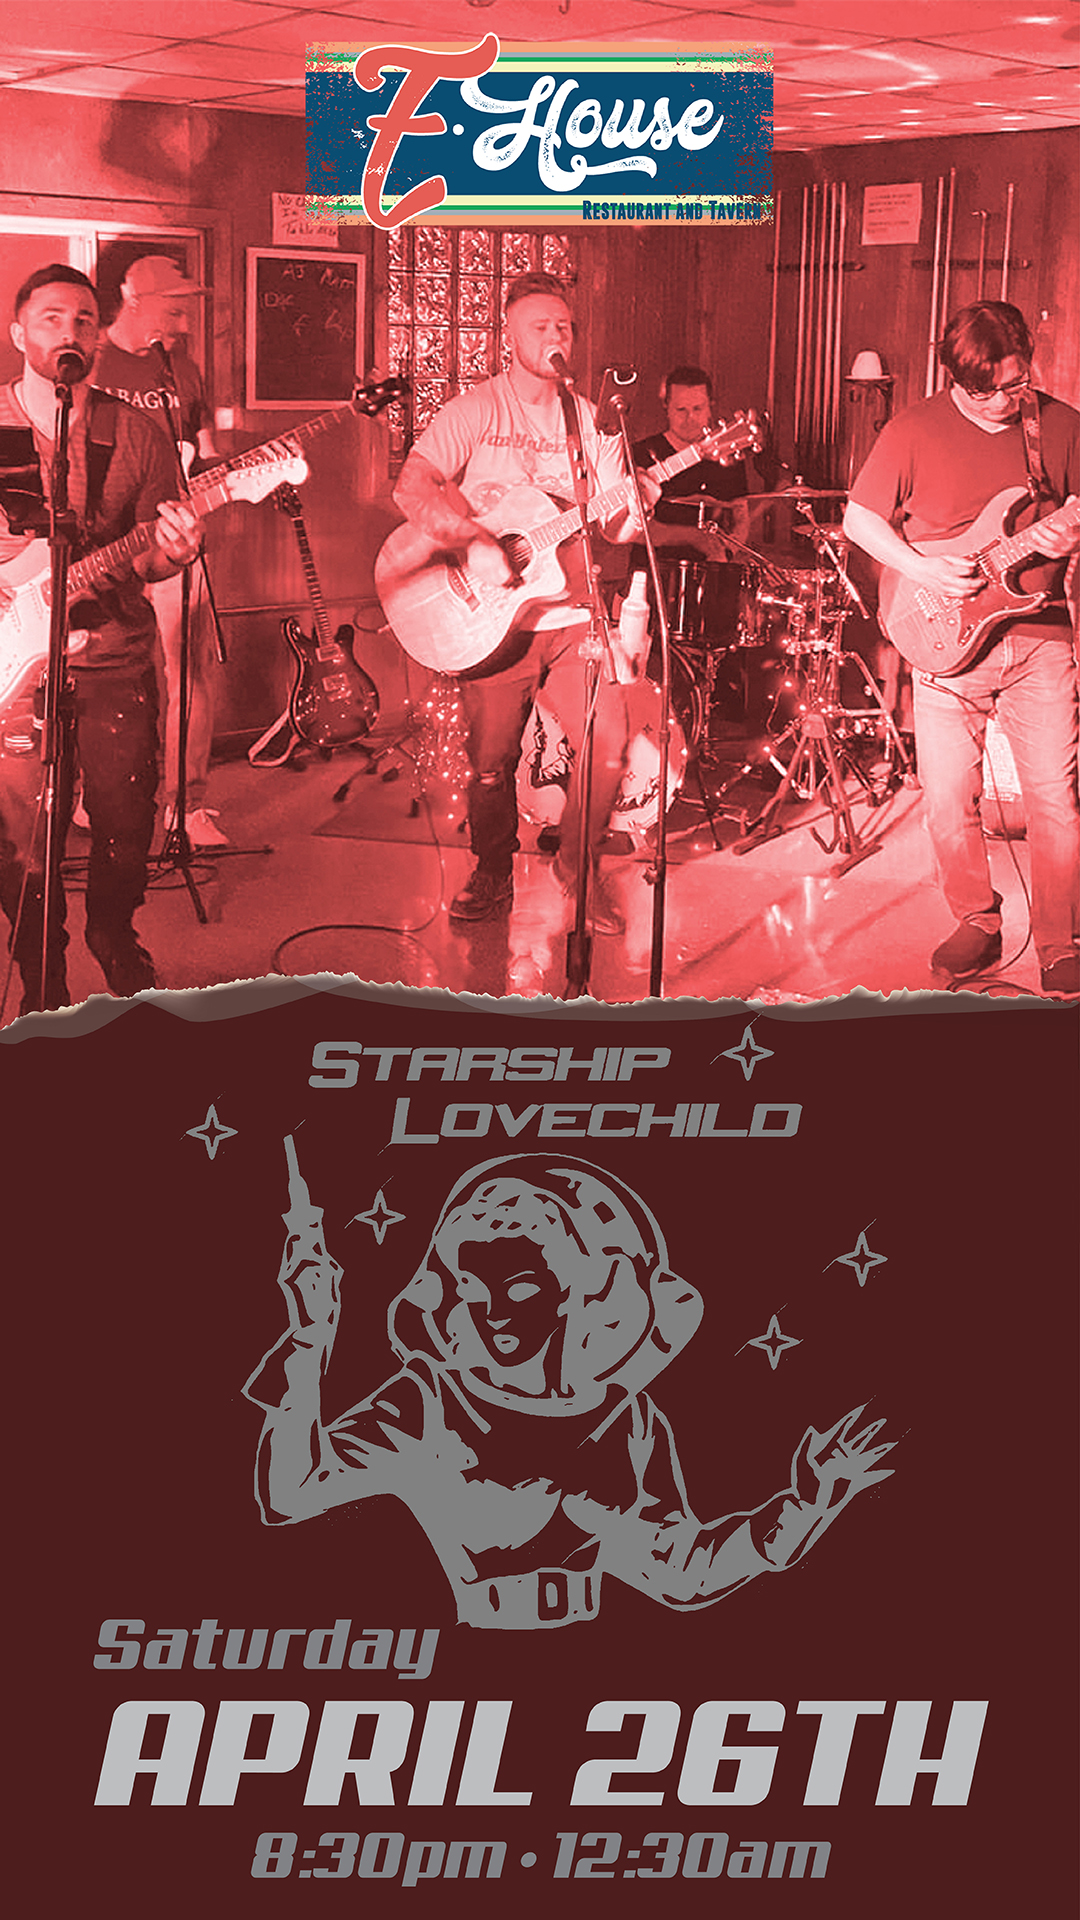 Live band performing at z-house on saturday, april 26th, with the event titled "starship lovechild".